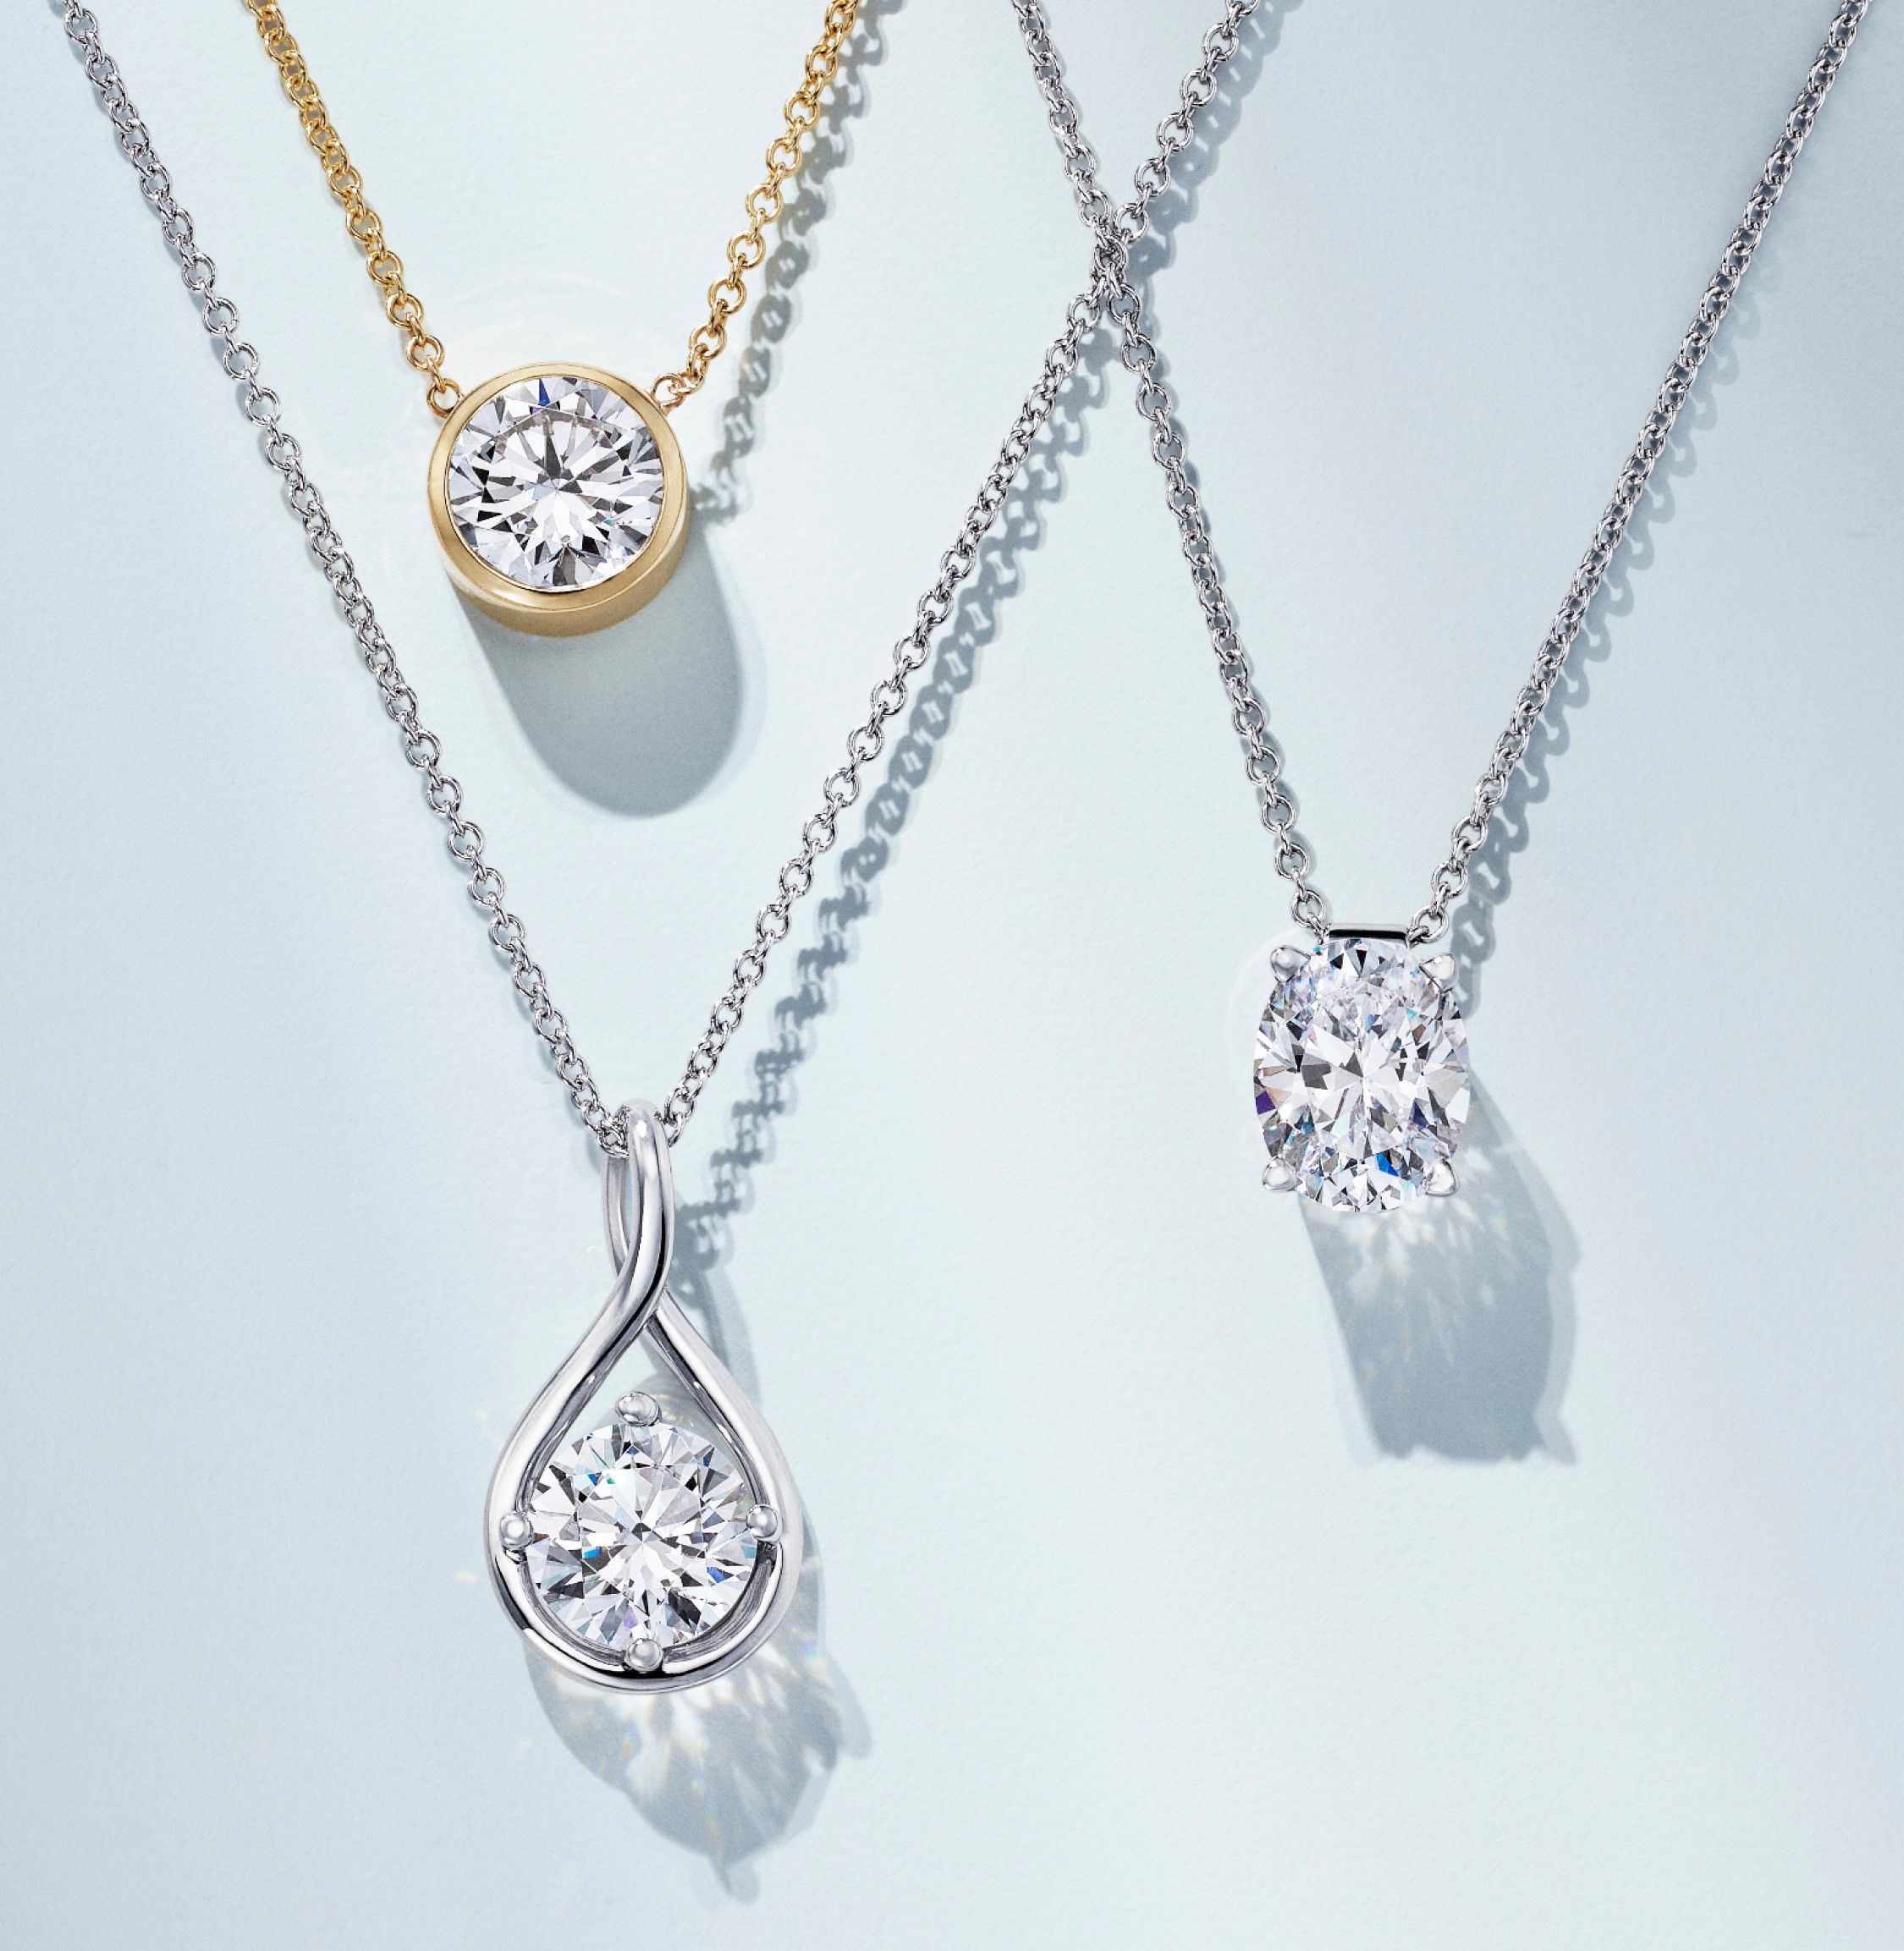 Diamond solitaire necklaces in a variety of settings.